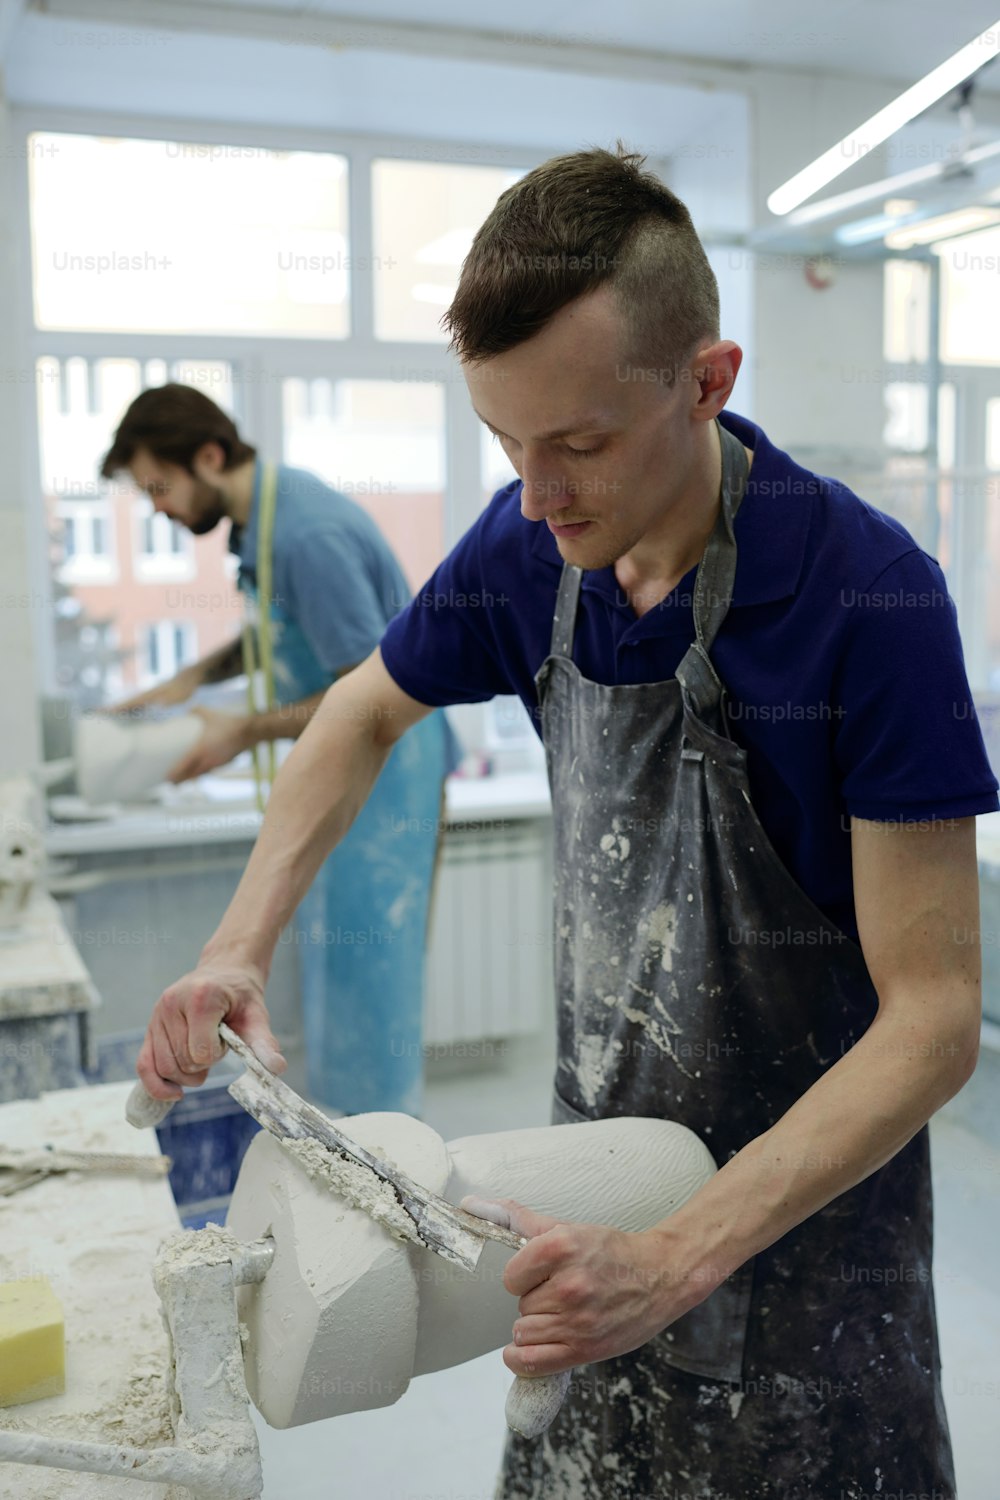 Worker of prosthetic factory cutting upper part of plaster cast while forming shape of residual limb against colleague